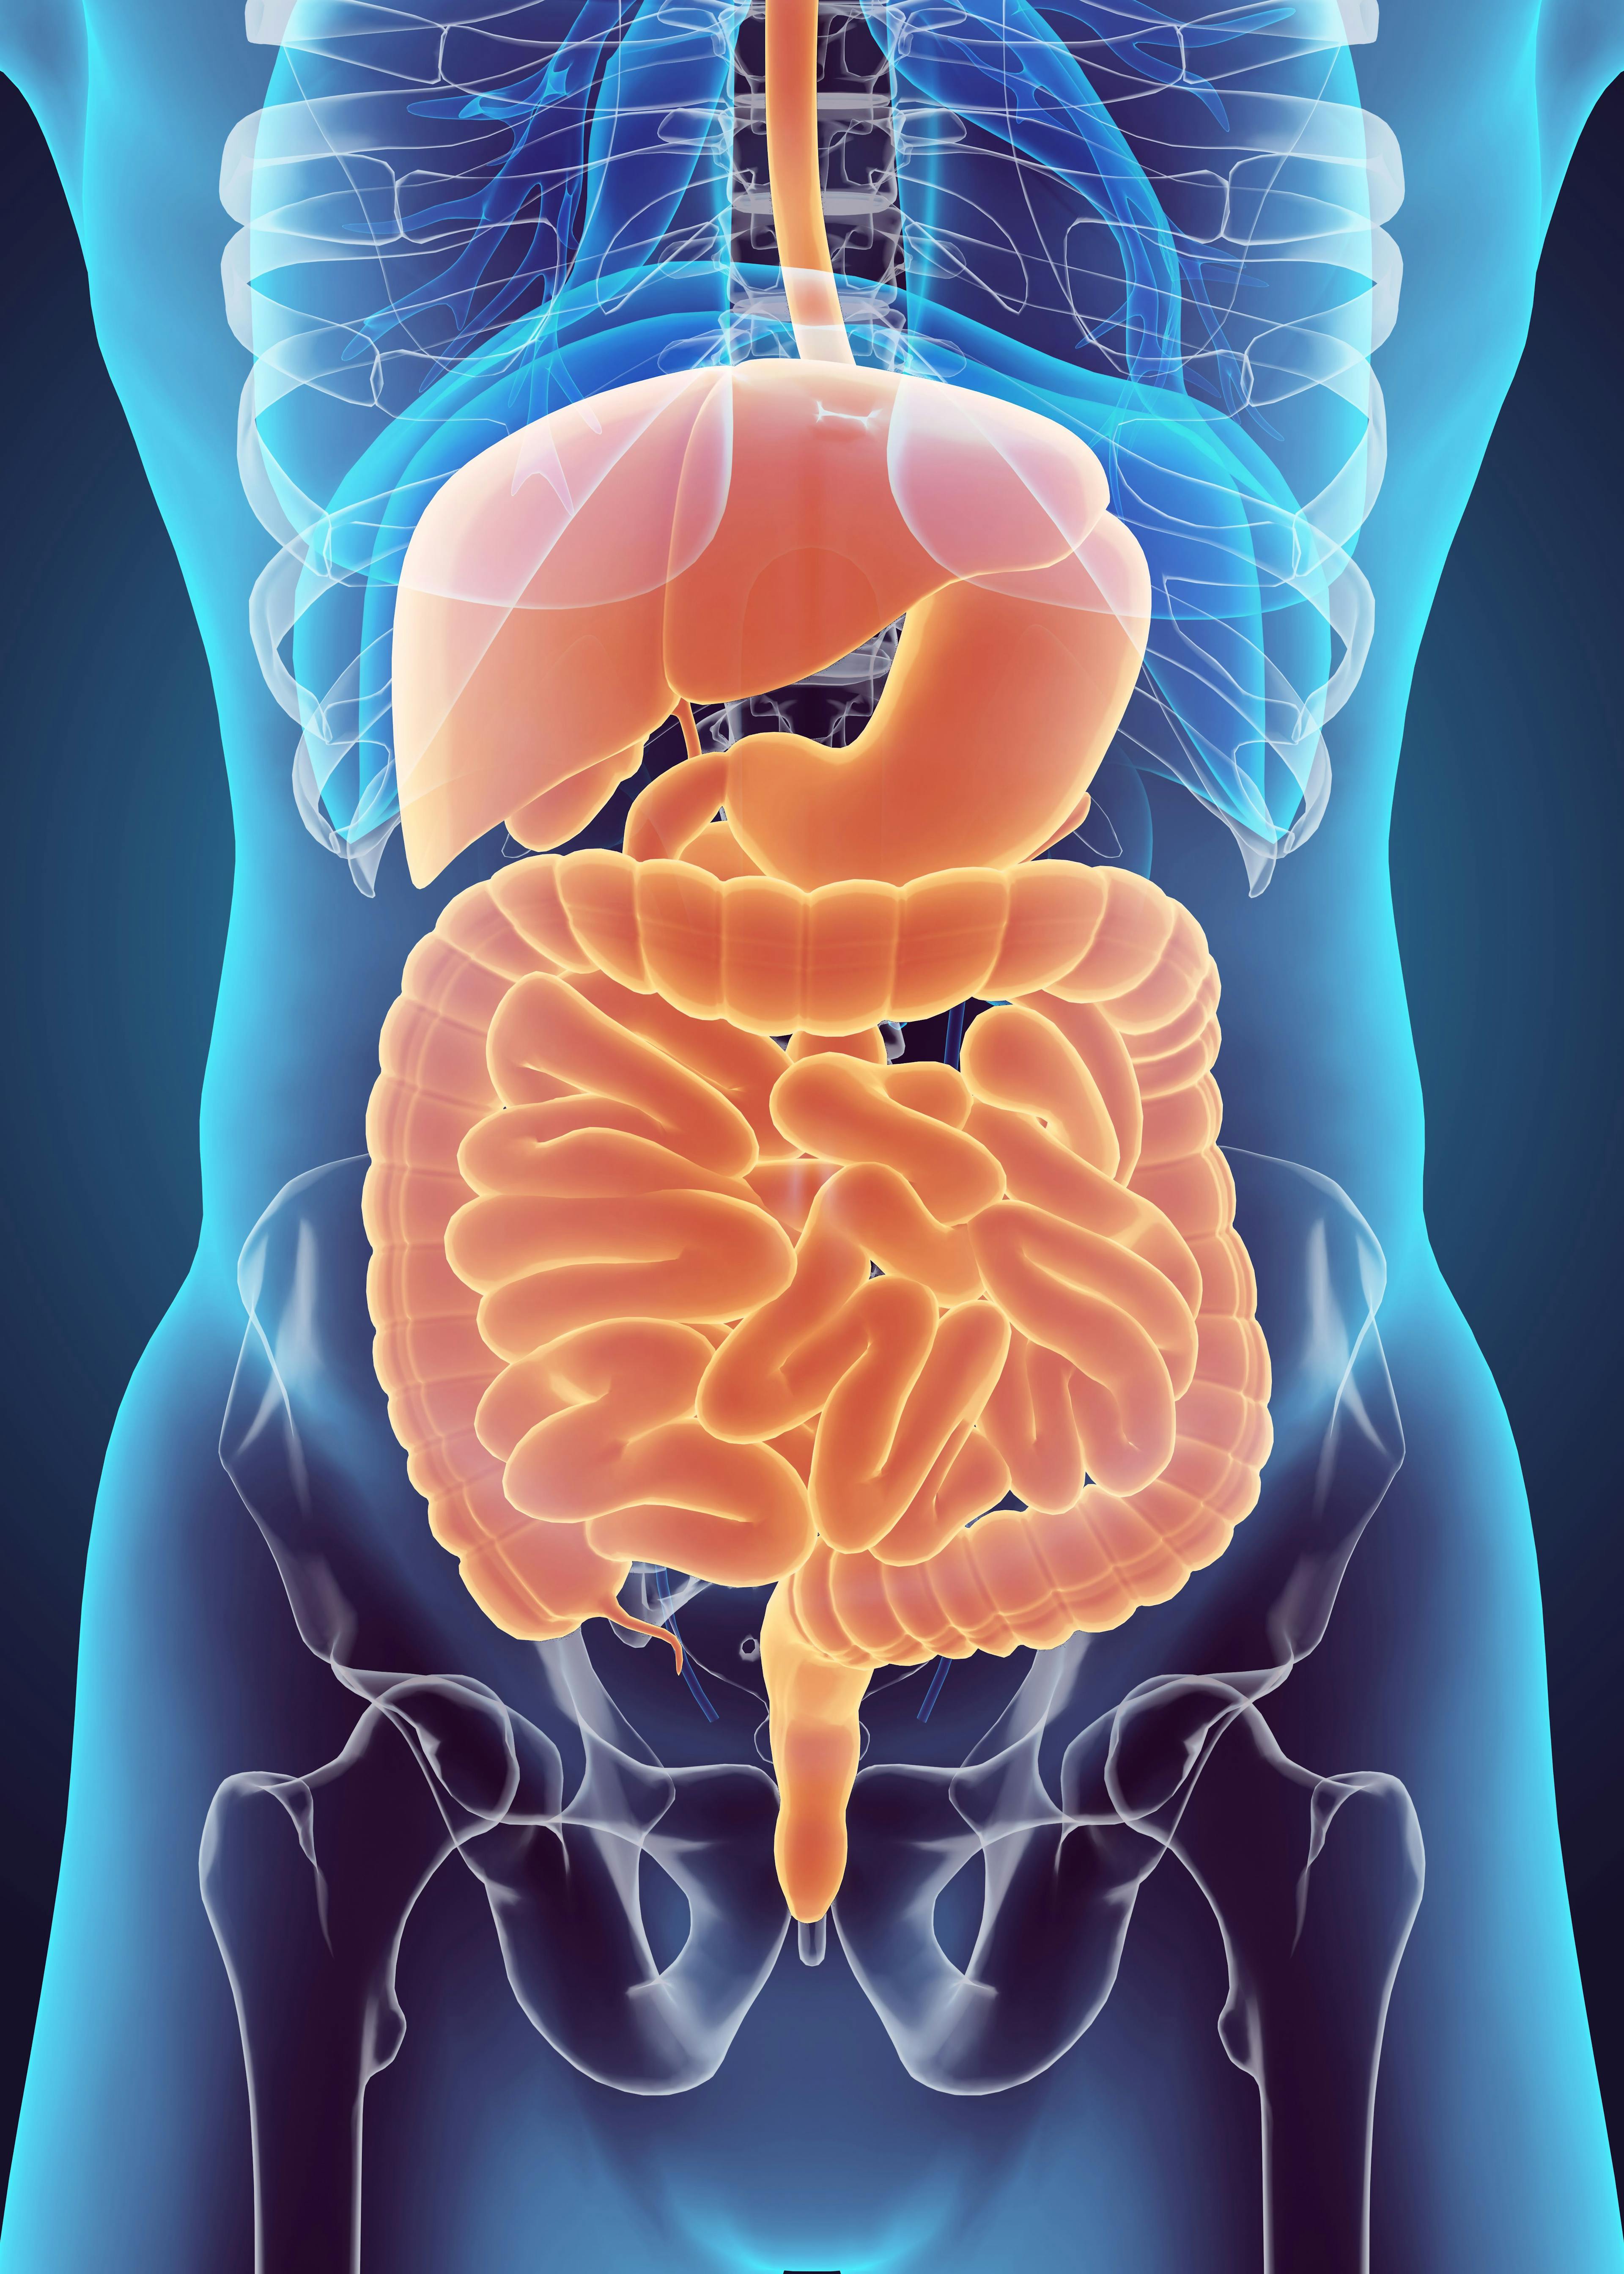 Although the combination of regorafenib and pembrolizumab failed to meet the progression-free survival end point, an improvement in overall survival and disease control was observed for patients with microsatellite stable colorectal cancer.